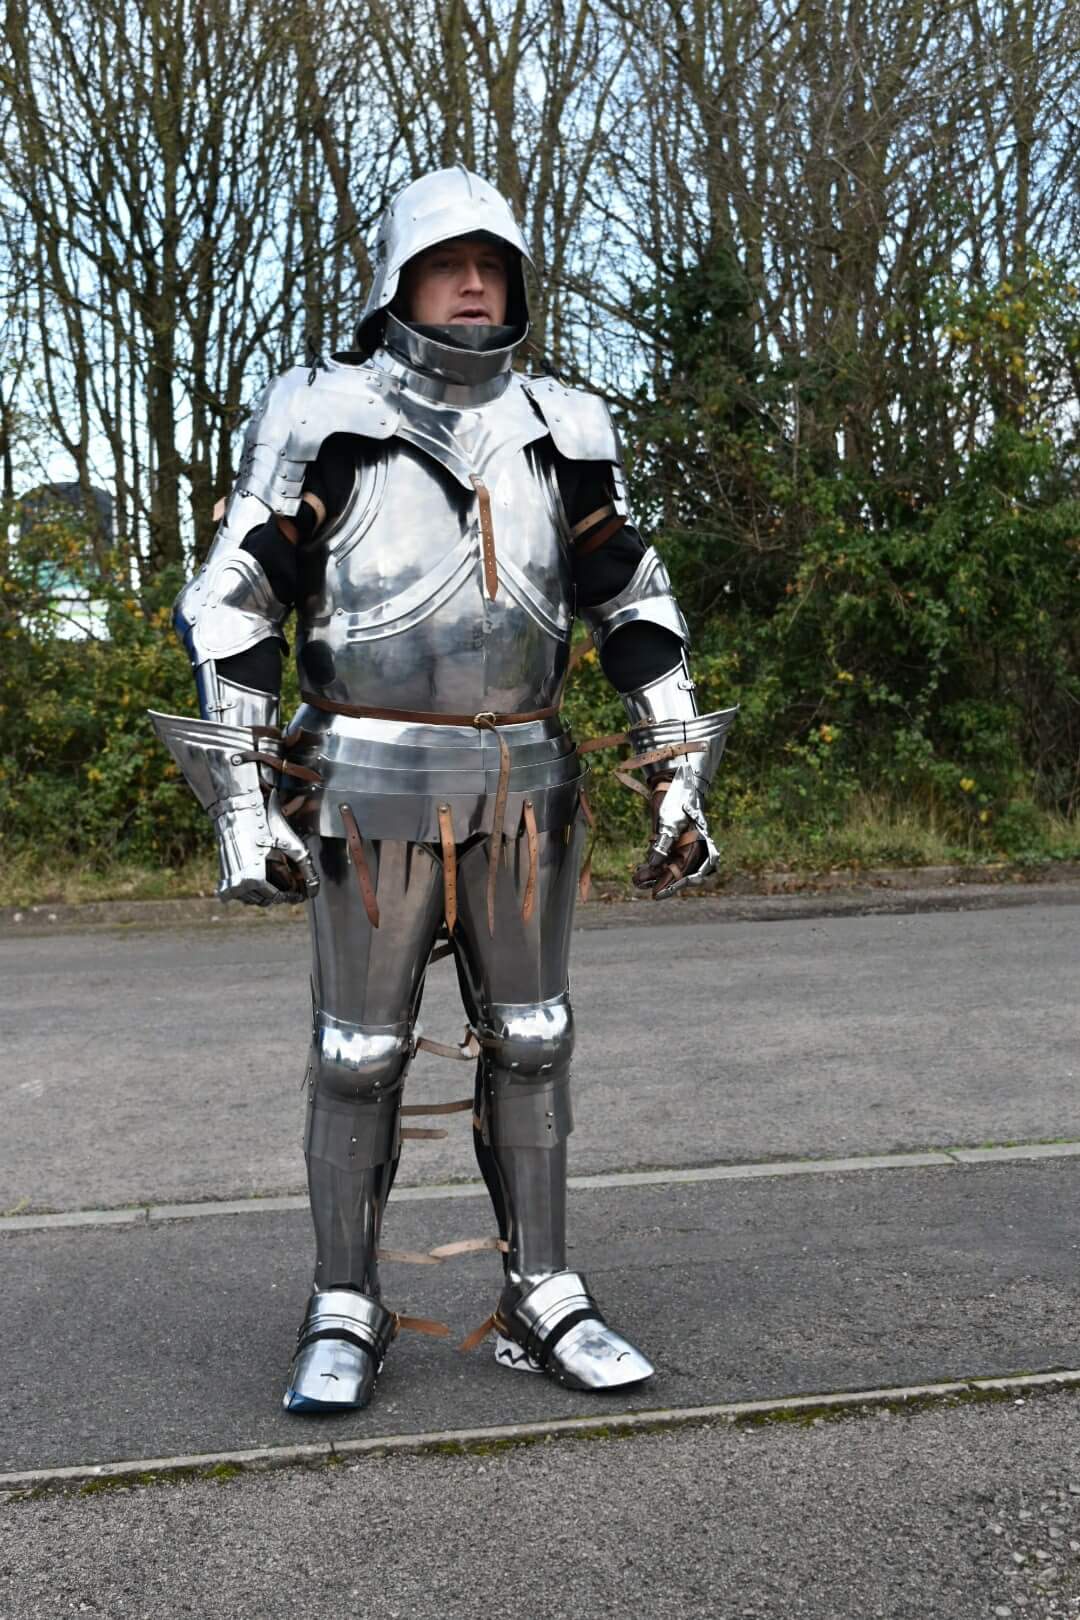 Army sergeant Paul Beddows, 33, will take on the Virgin Money London Marathon in a suit of armour. He is fundraising for Armed Forces charity SSAFA. (SSAFA/ PA)